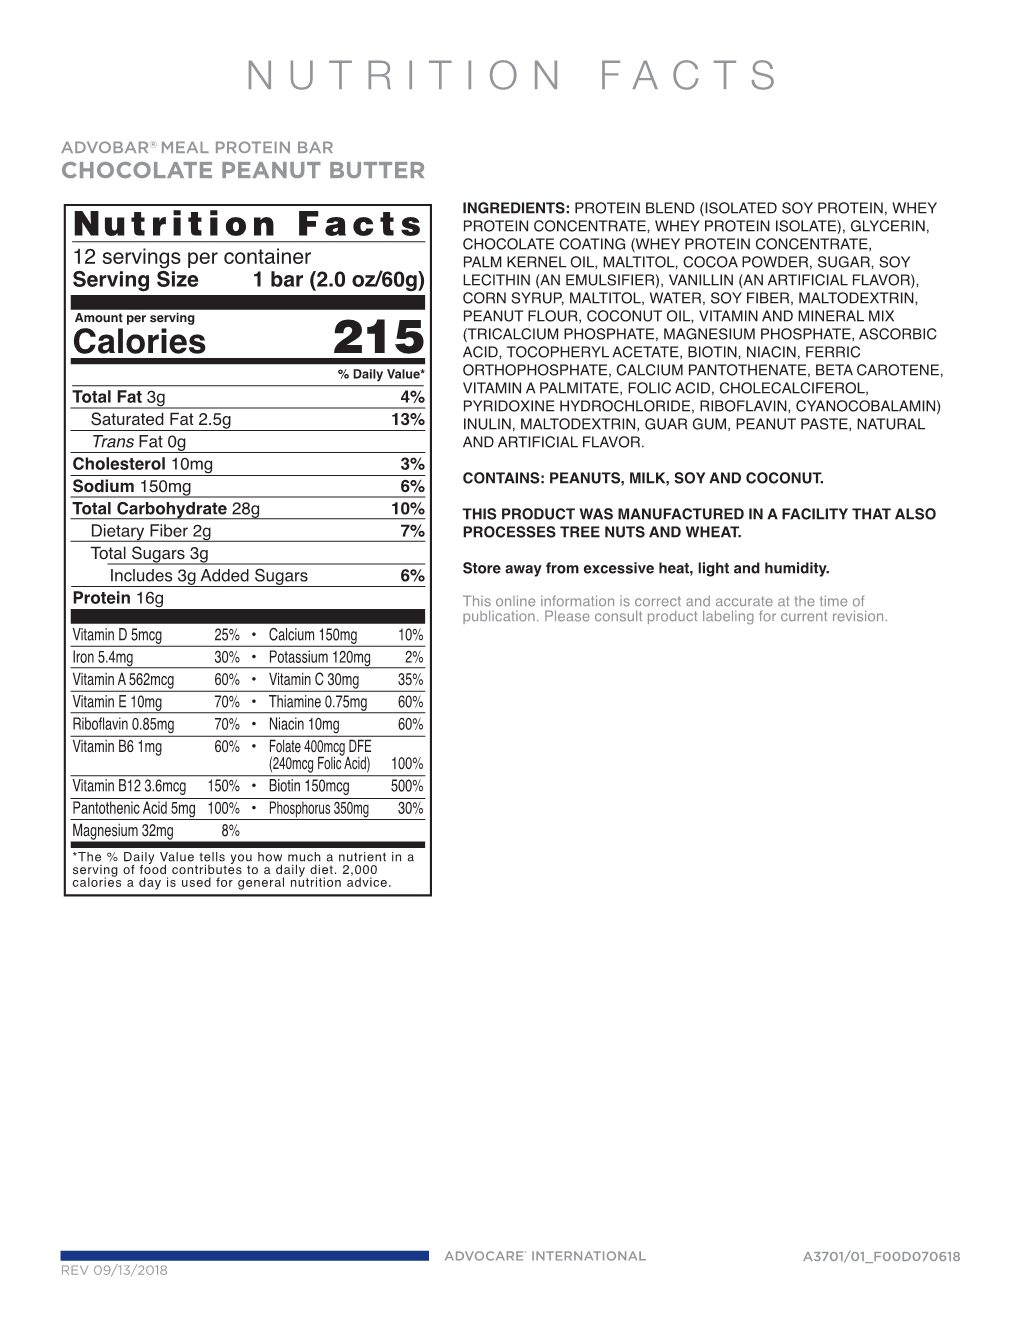 Advobar® Meal Protein Bar Chocolate Peanut Butter Nutrition Facts